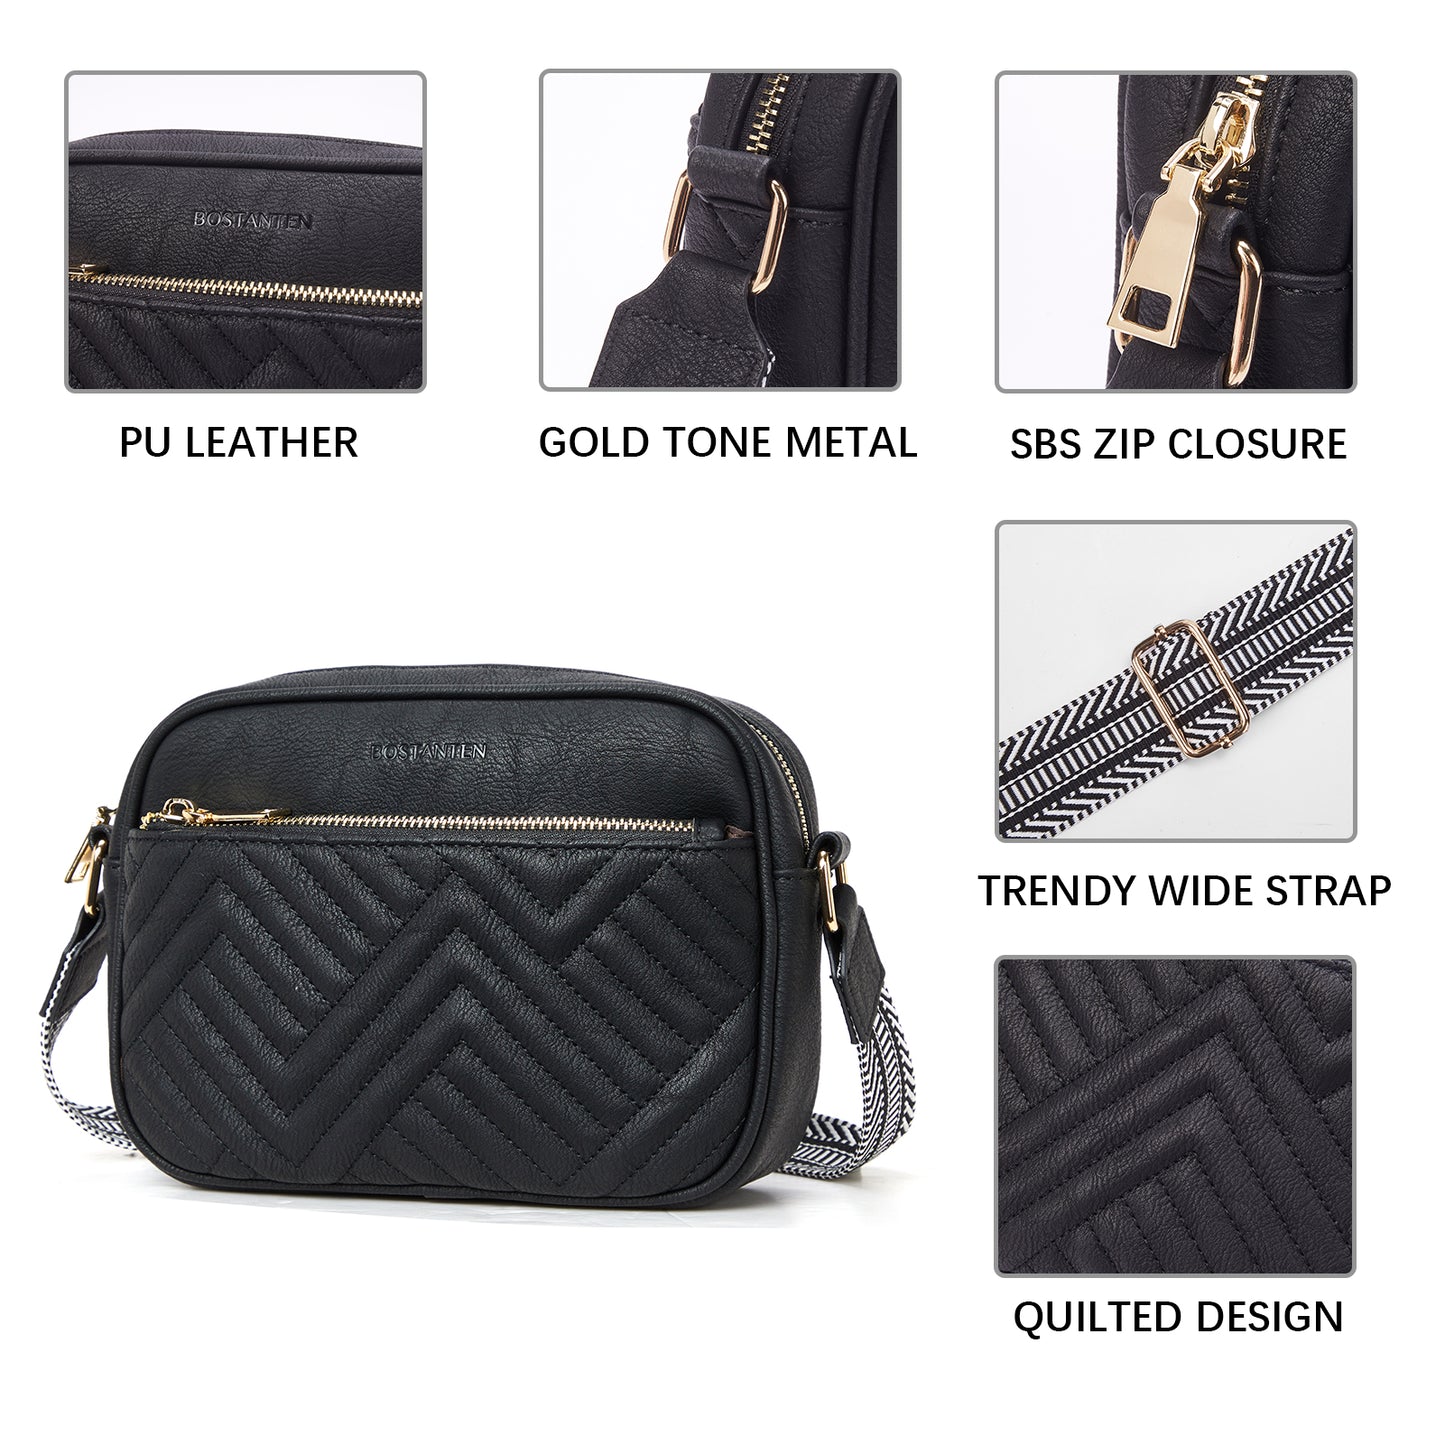 BOSTANTEN Quilted Crossbody Bags for Women Vegan Leather Purses Small Shoulder Handbags with Wide Strap